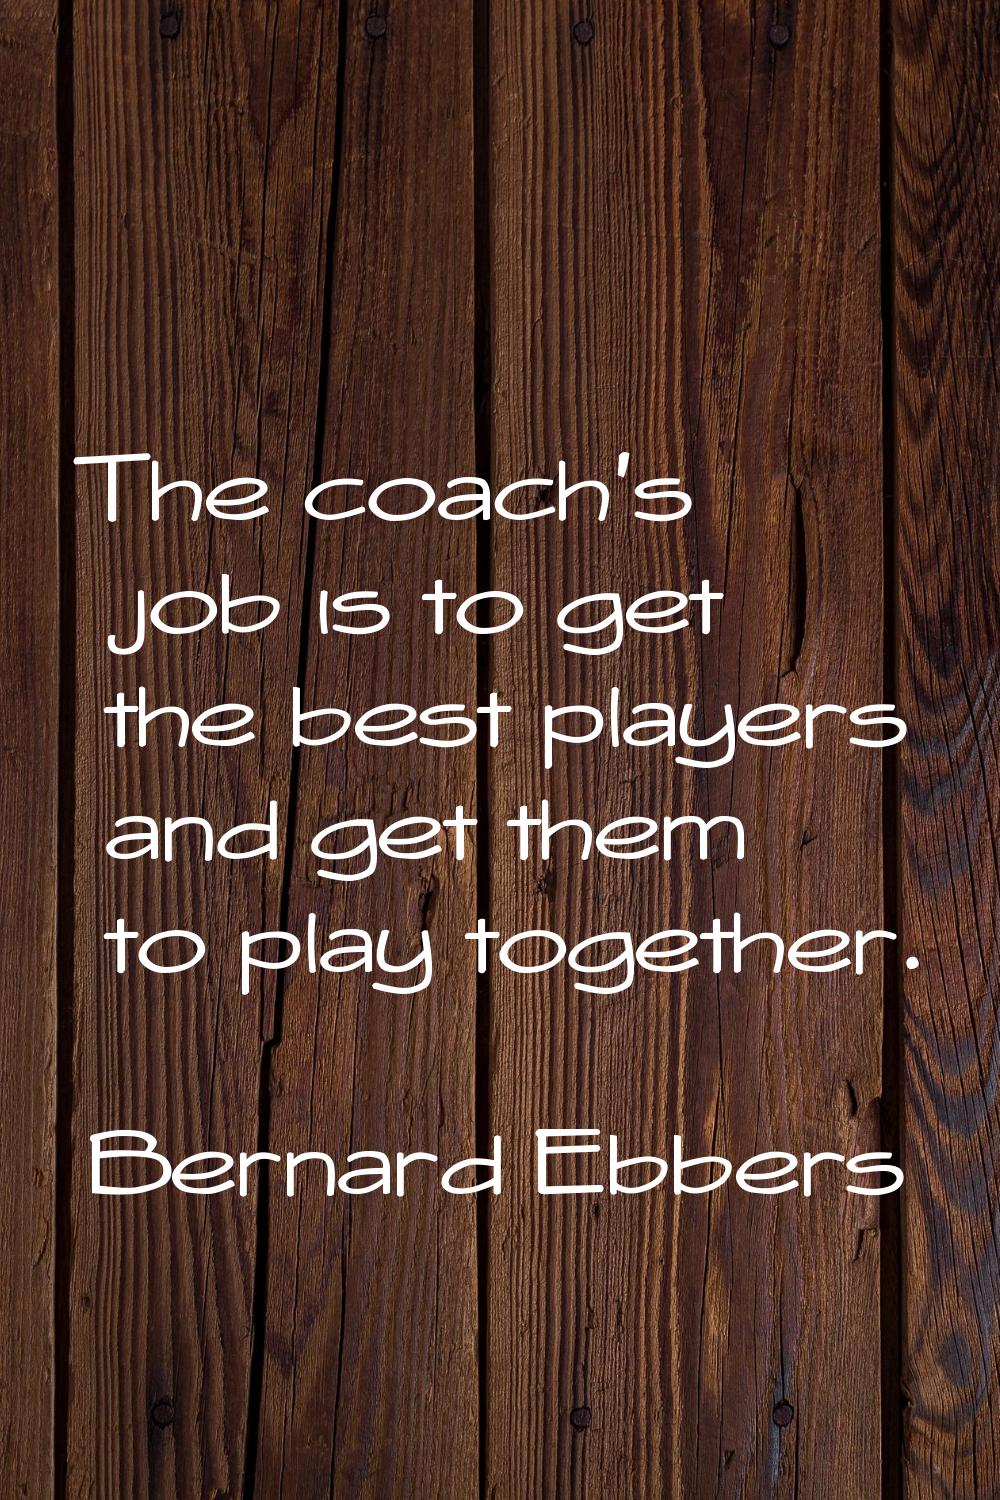 The coach's job is to get the best players and get them to play together.